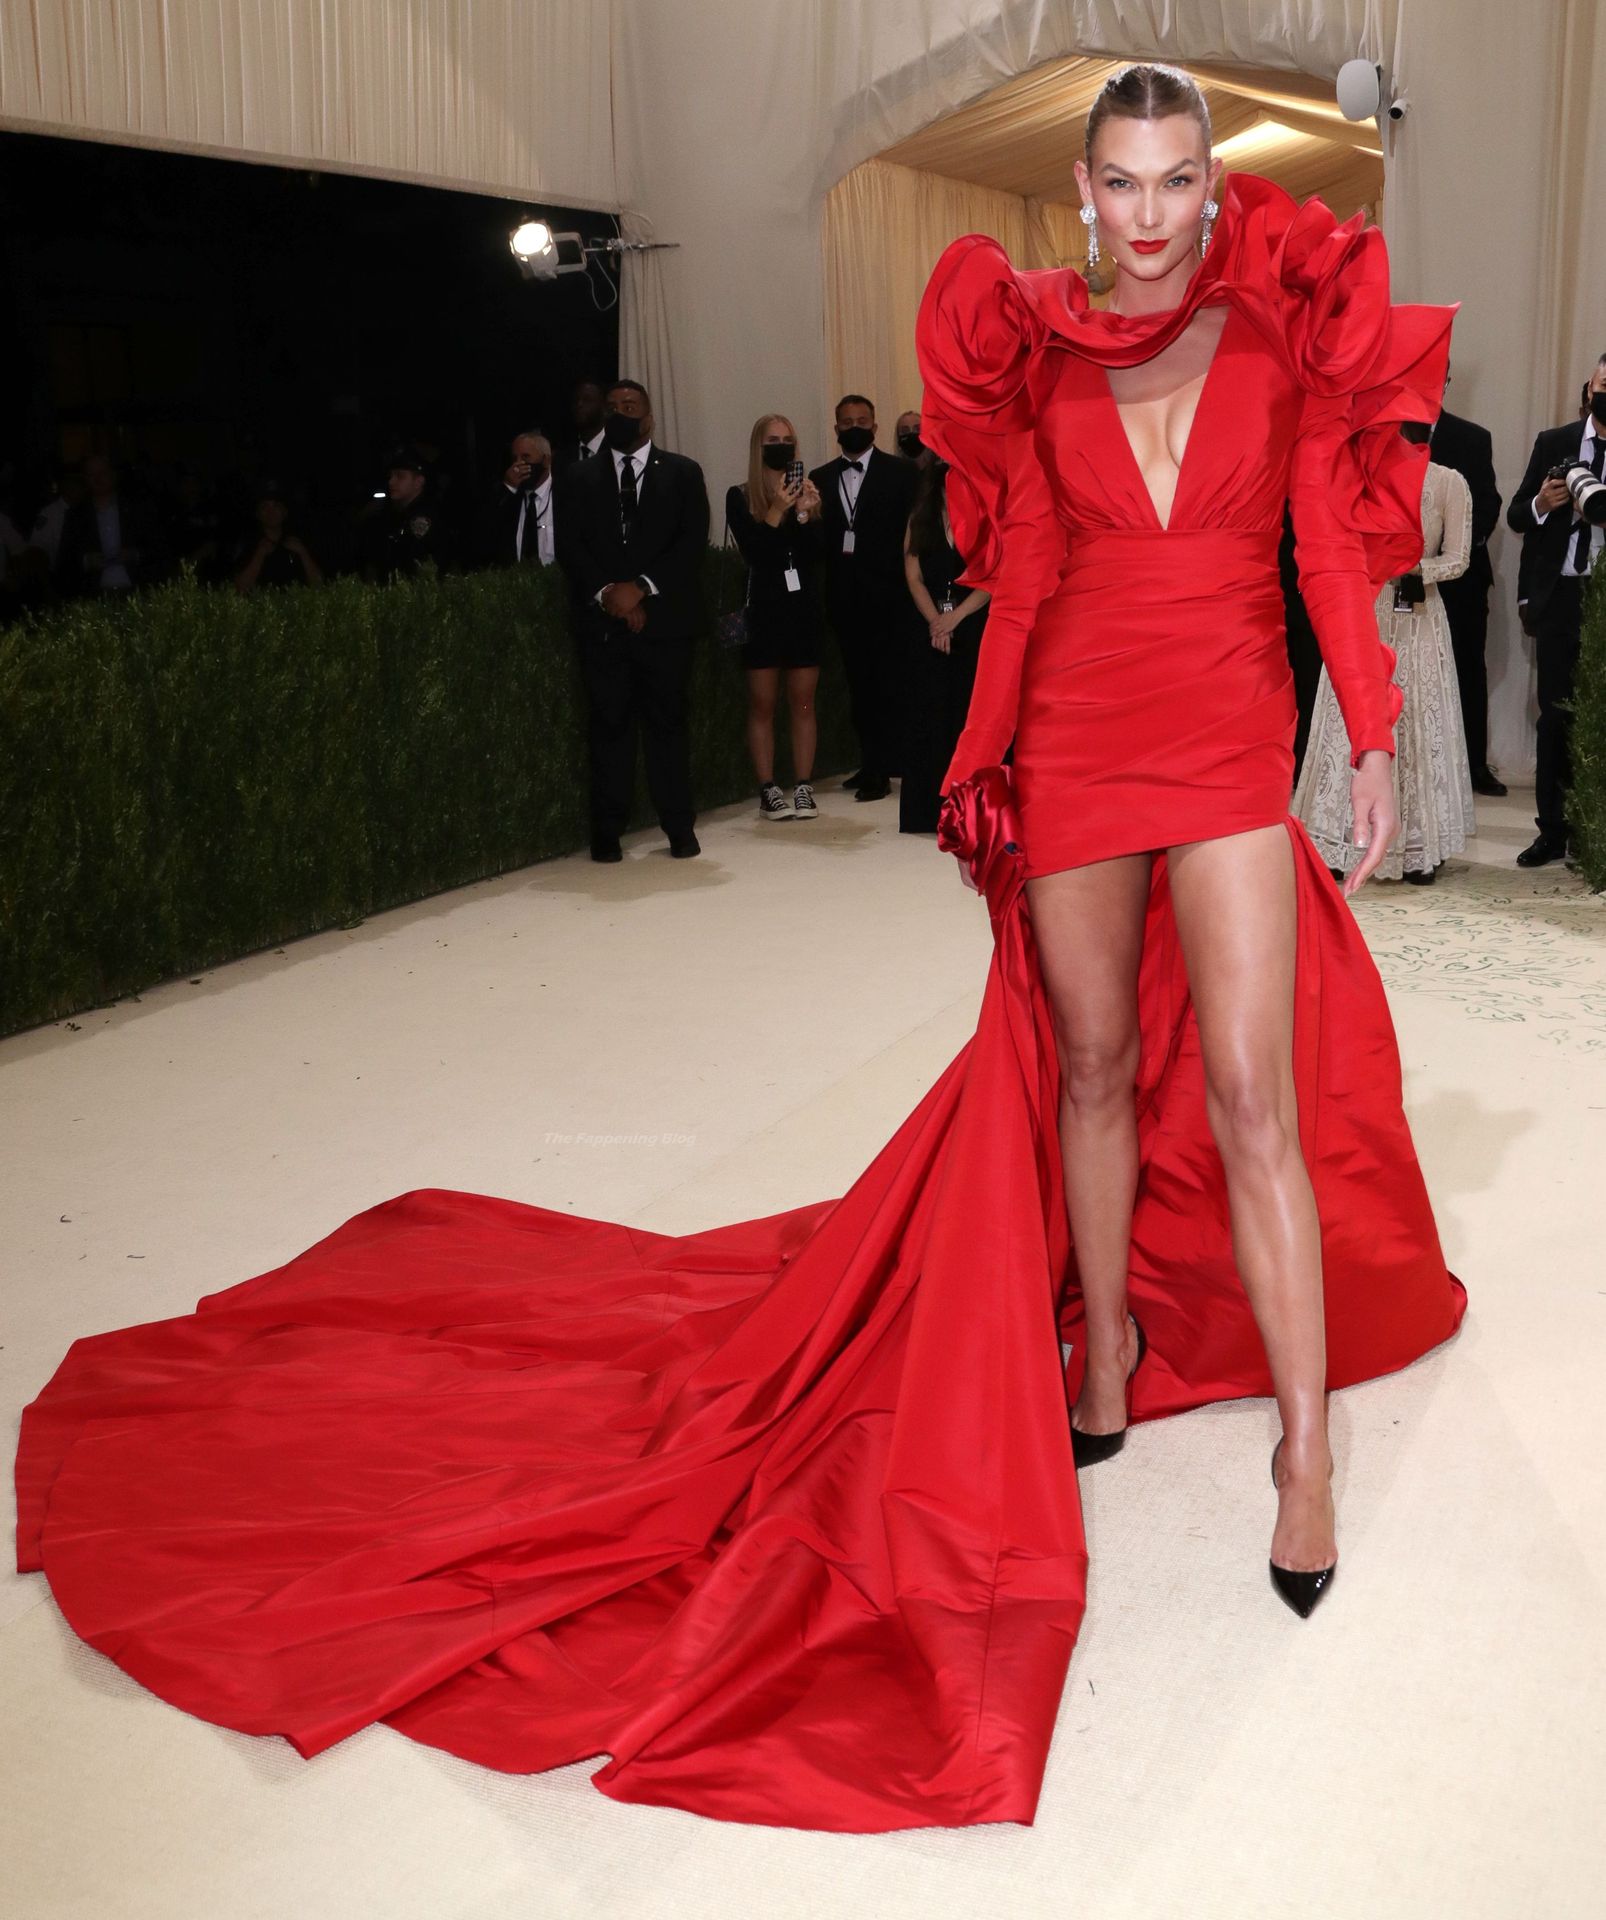 Karlie Kloss Displays Her Cleavage in a Red Dress at the 2021 Met Gala in NYC (23 Photos)